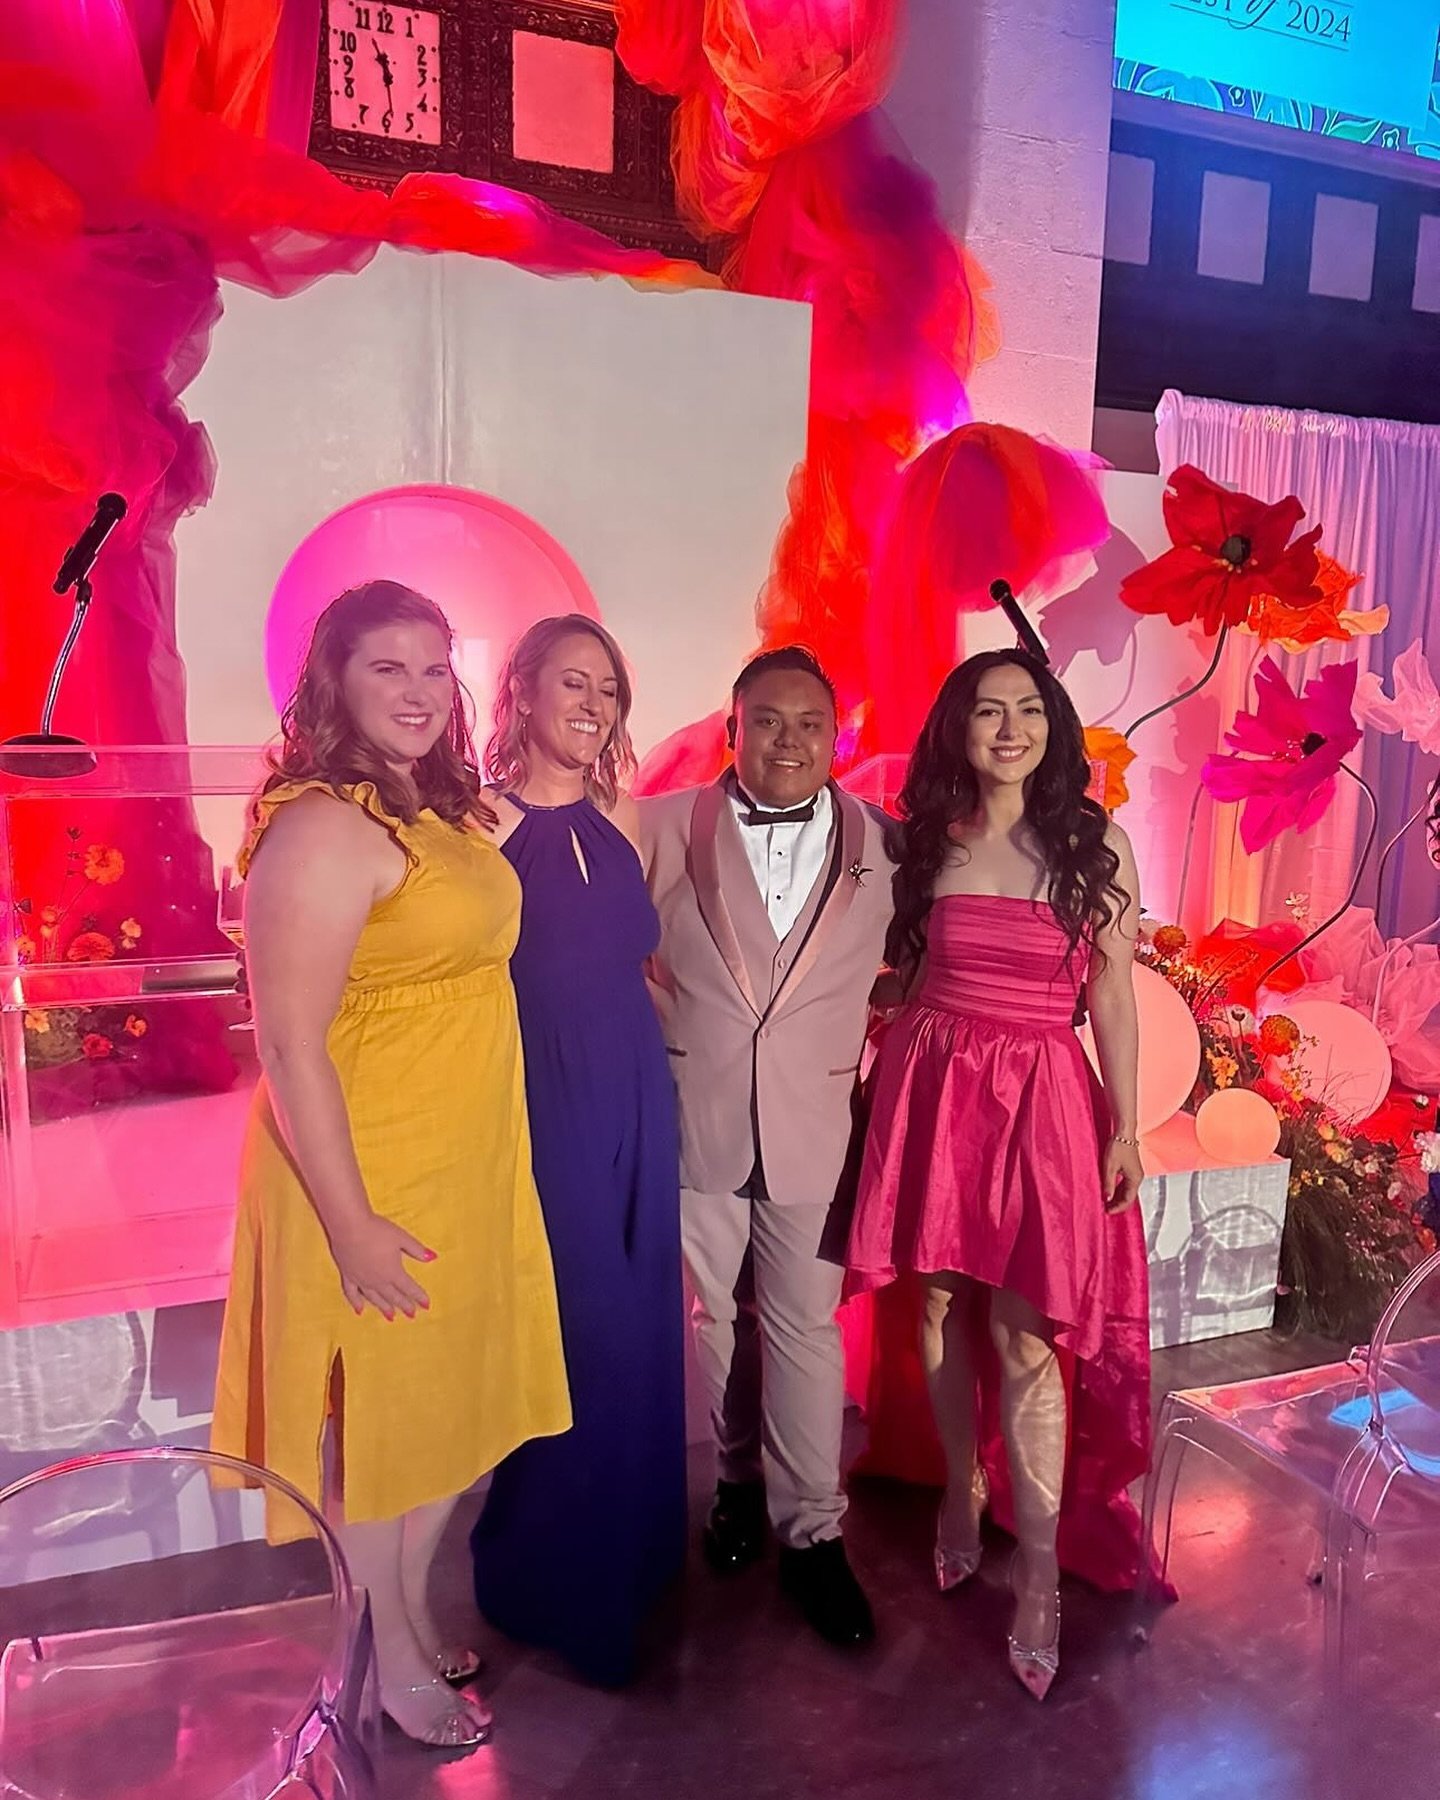 Congrats to our incredible CCWP friendors @palette.and.pine , @rachell_rae_designs , @_mdlevents_ , @marehcouture , @flowersbykim  for their nominations and wins for @californiaweddingday &lsquo;s awards. We love that we get to bring incredible vendo